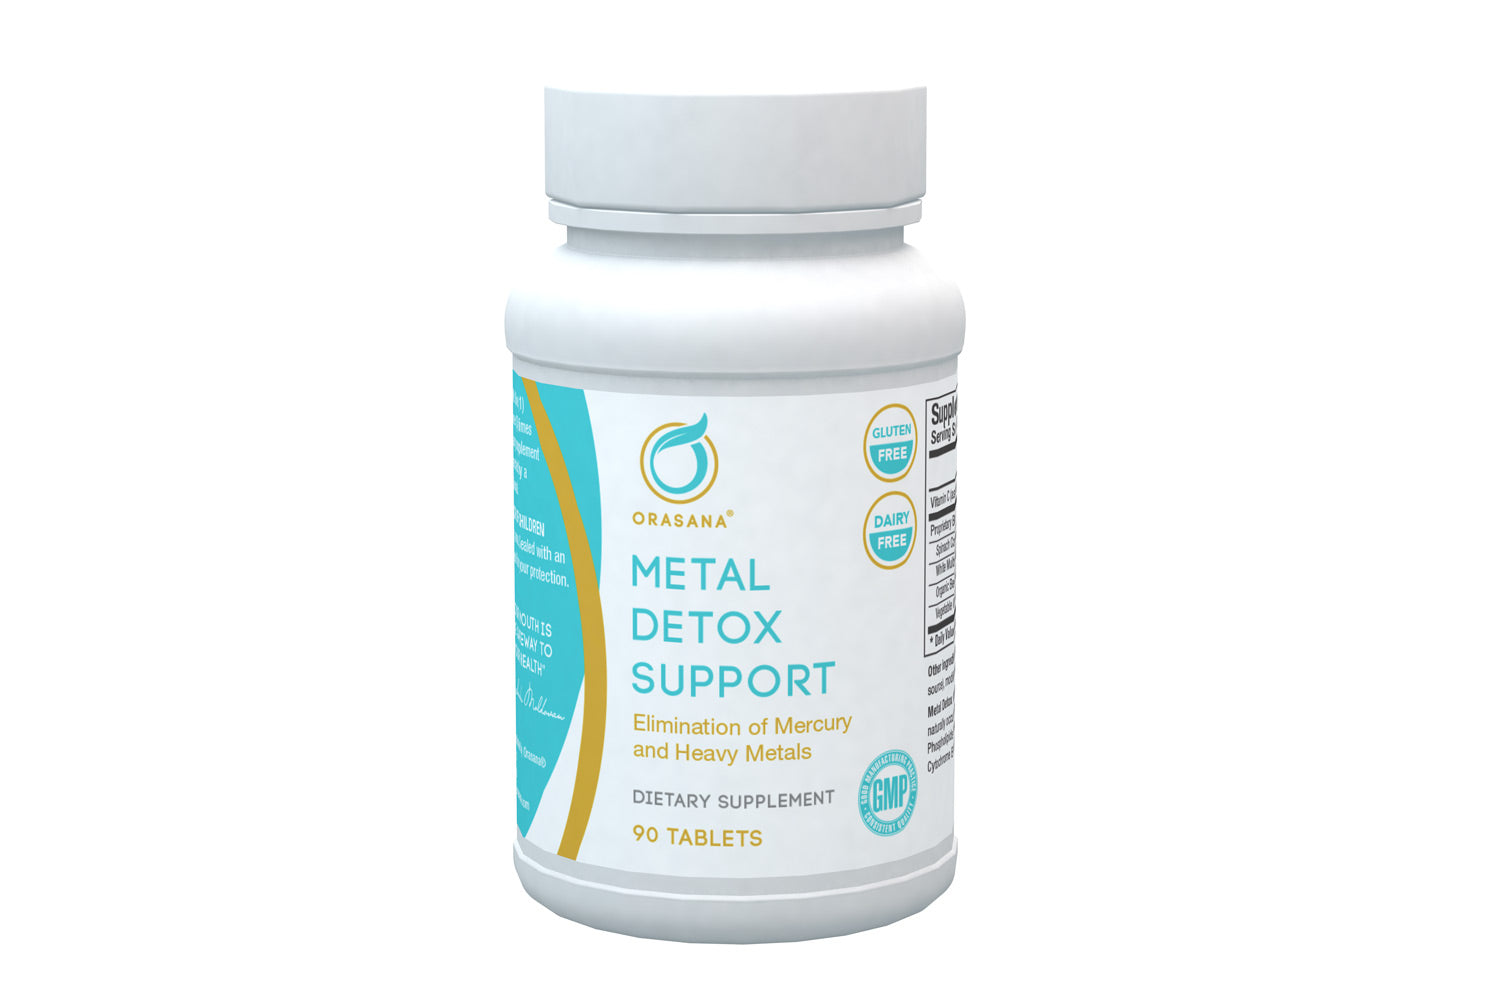 2023 Best Metal Detox that supports healthy elimination of toxic metals, such as mercury, lead and arsenic